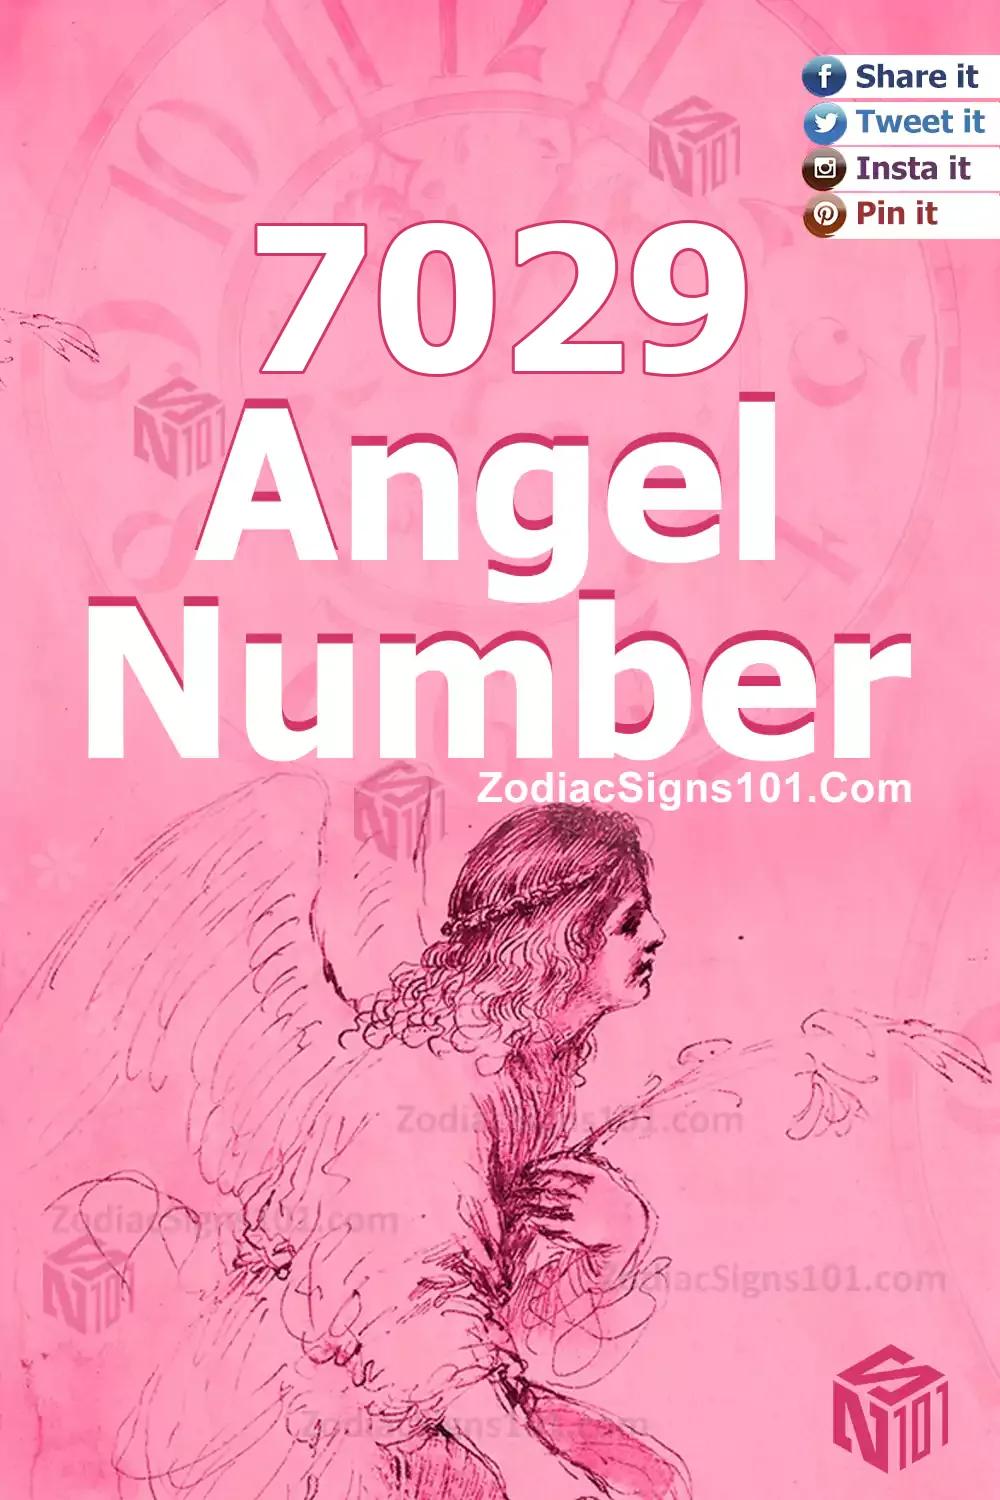 7029 Angel Number Meaning